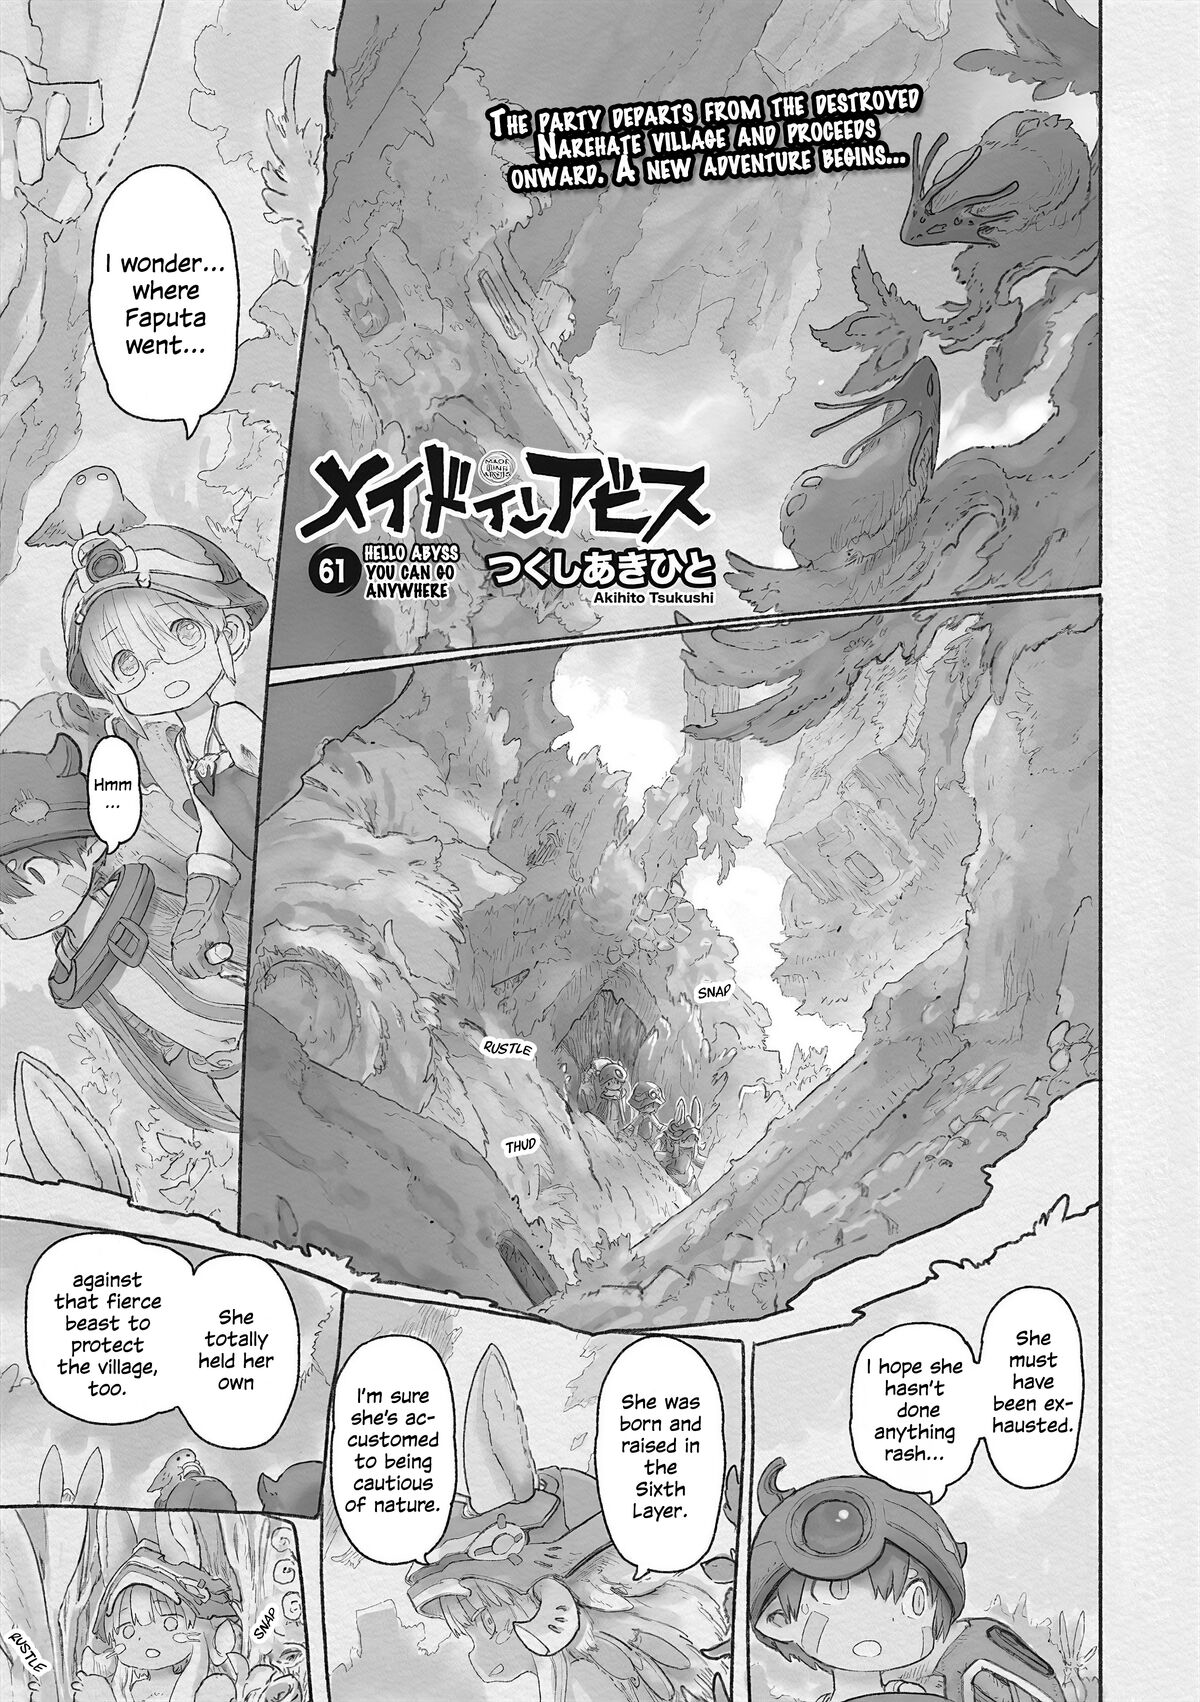 Made in Abyss Chapter 057, Made in Abyss Wiki